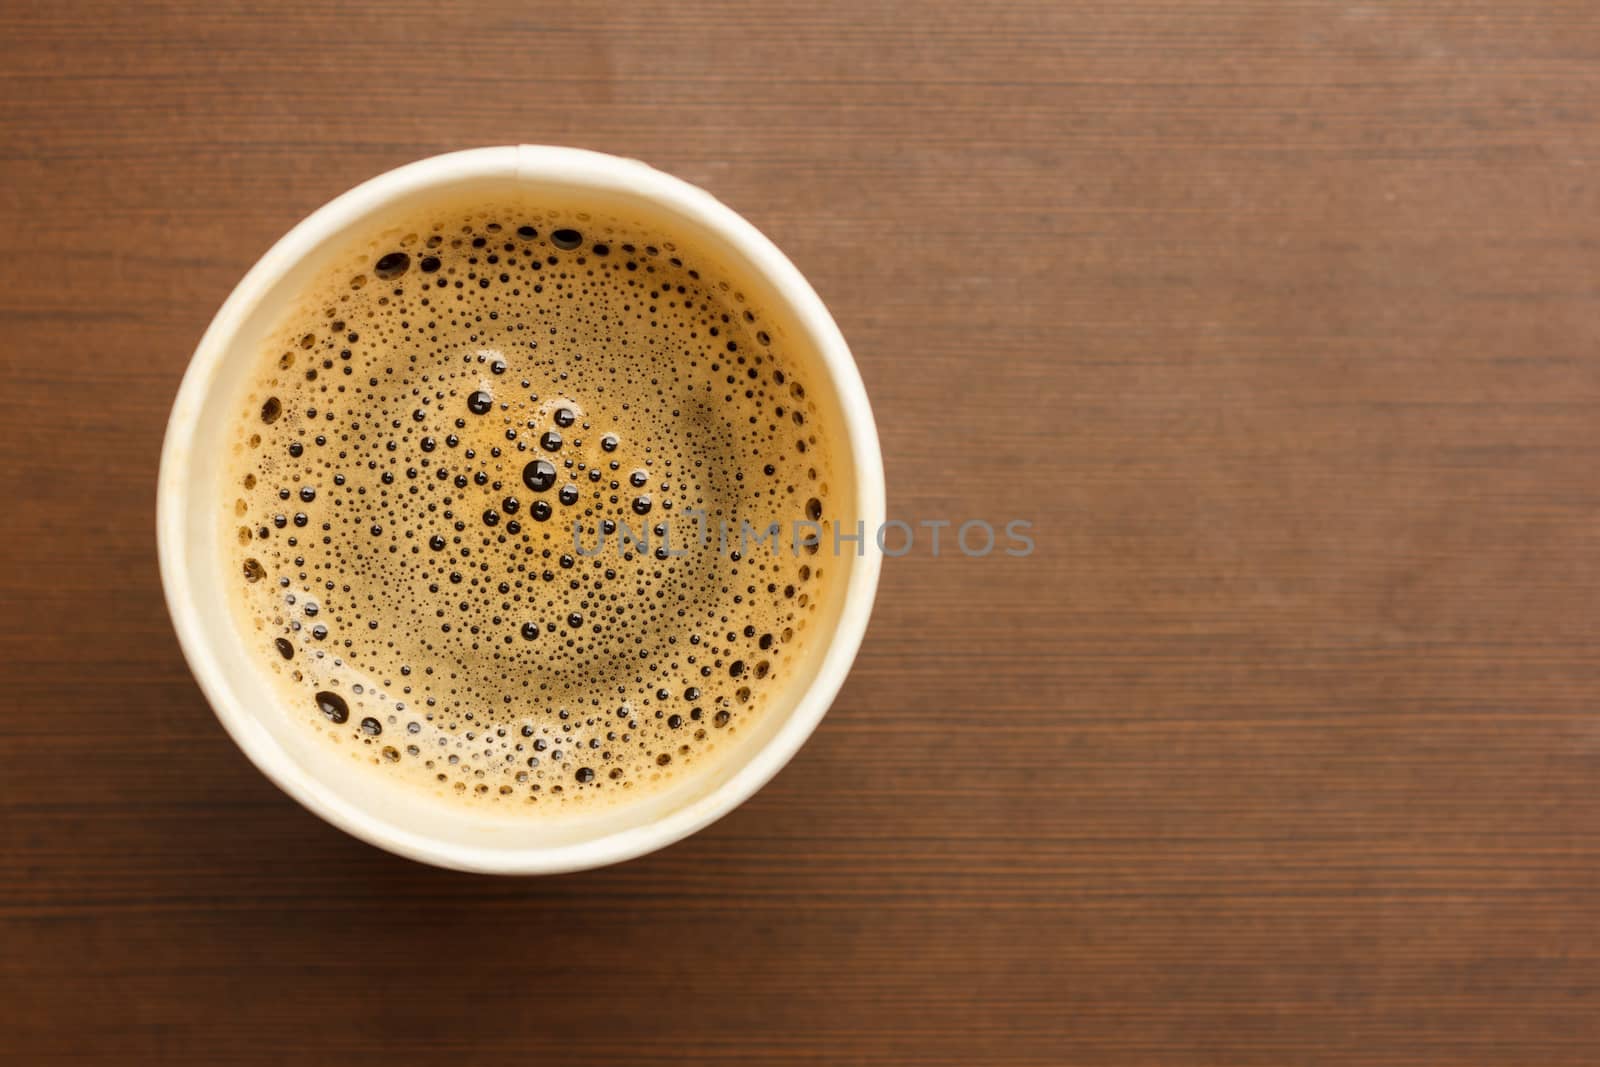 Top view of a paper cup of black coffee on wooden table